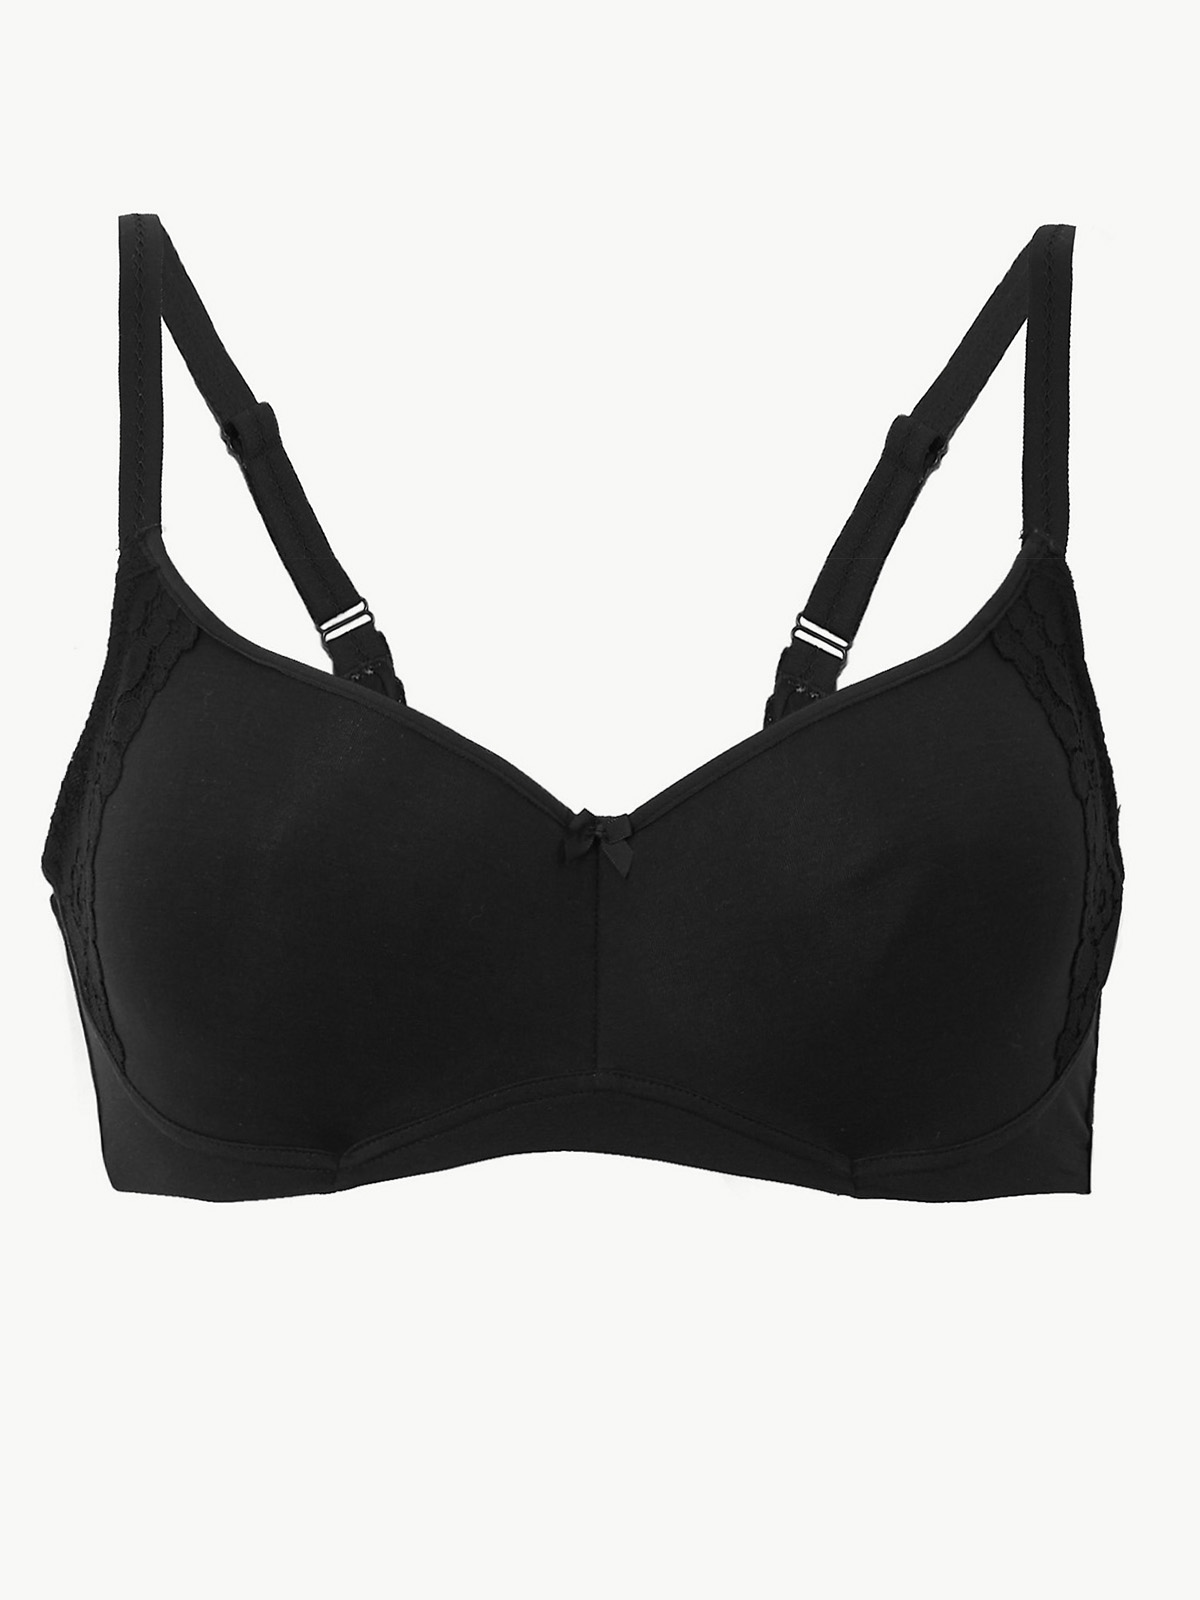 Charnos Superfit Smooth T Shirt Bra, Pour Moi, Superfit Smooth T Shirt  Bra, Black